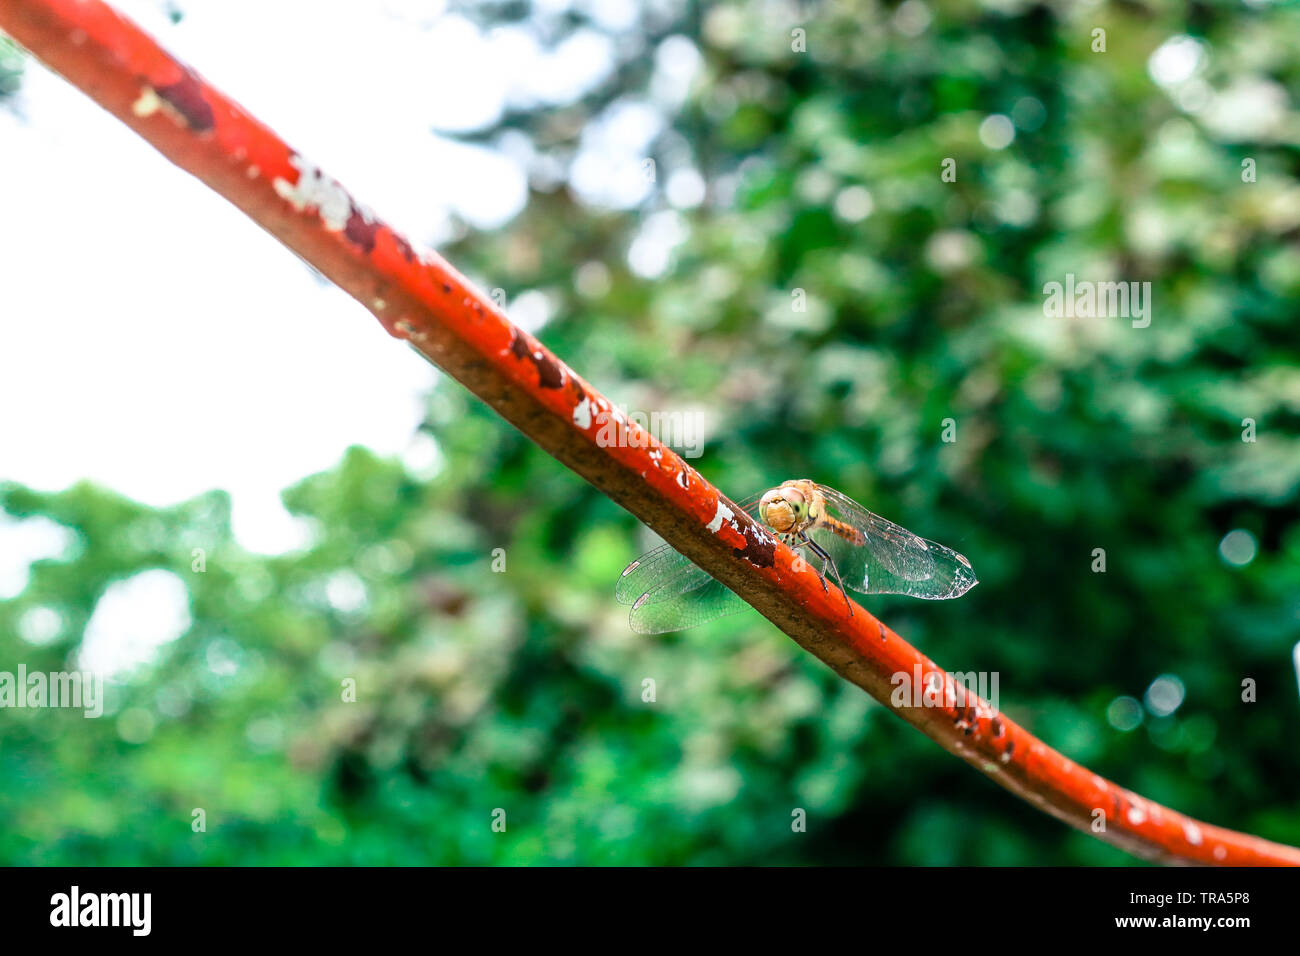 Dragonfly is resting from a long flight on a red pipe. Stock Photo